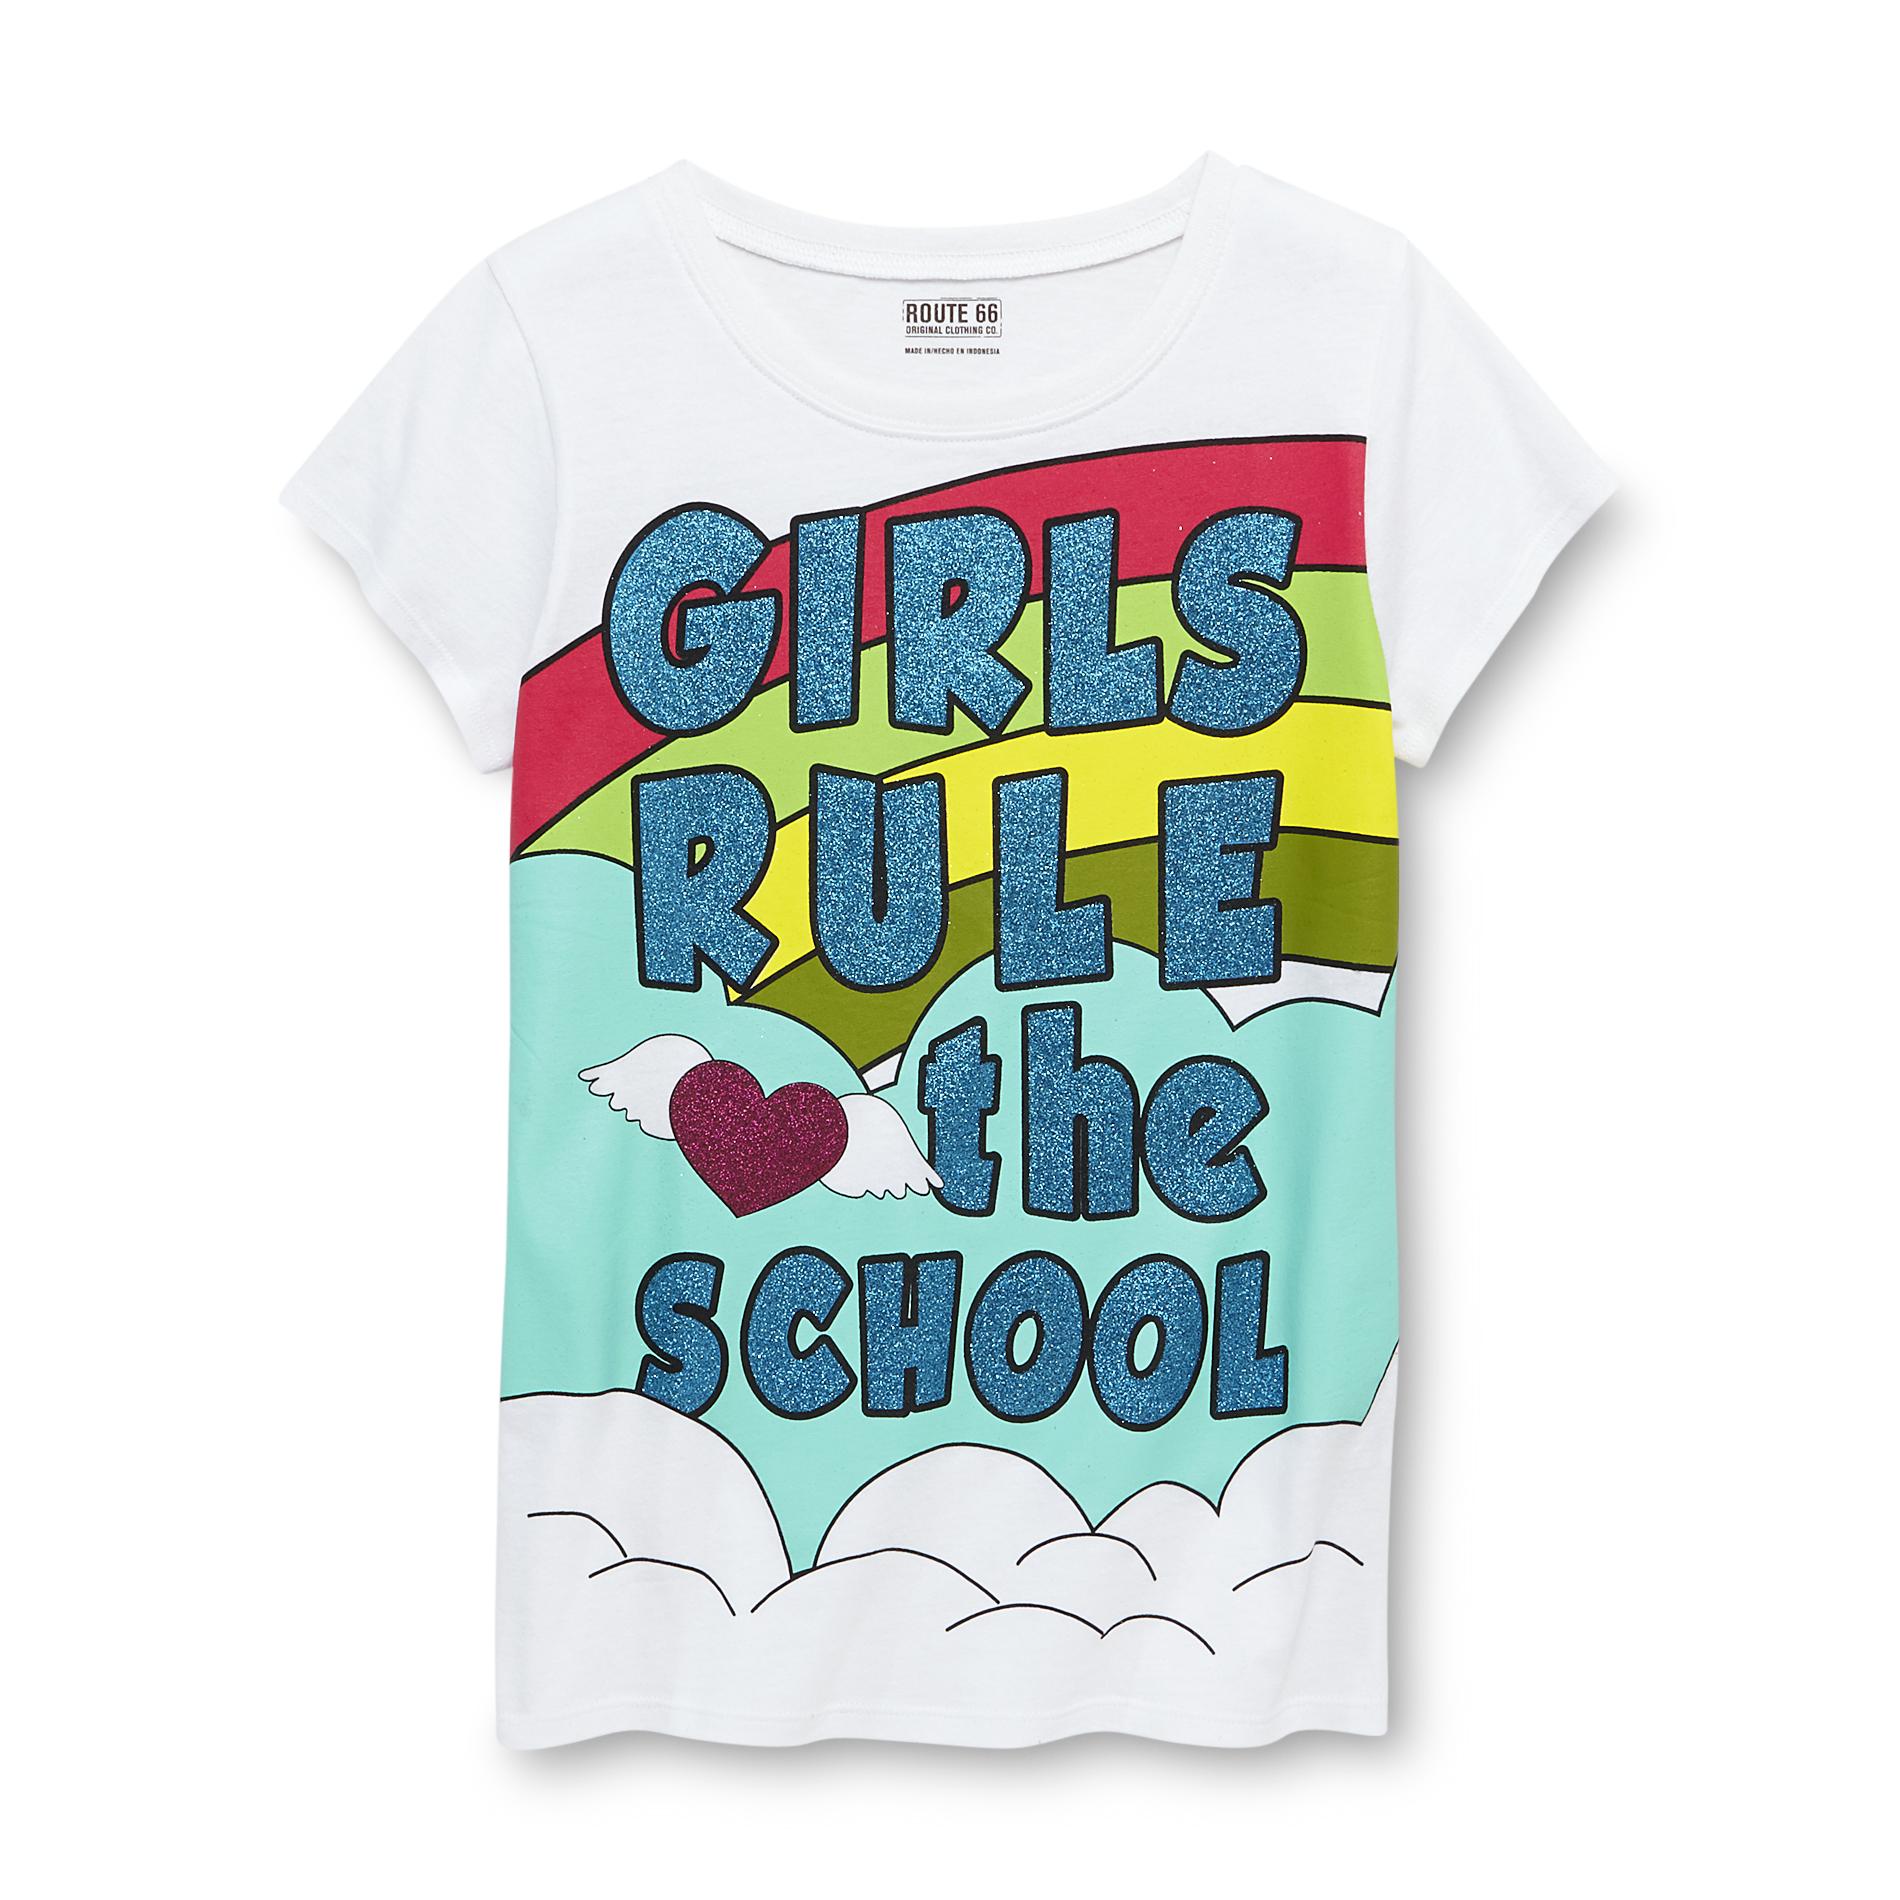 Route 66 Girl's Glittered Graphic T-Shirt - Girls Rule The School